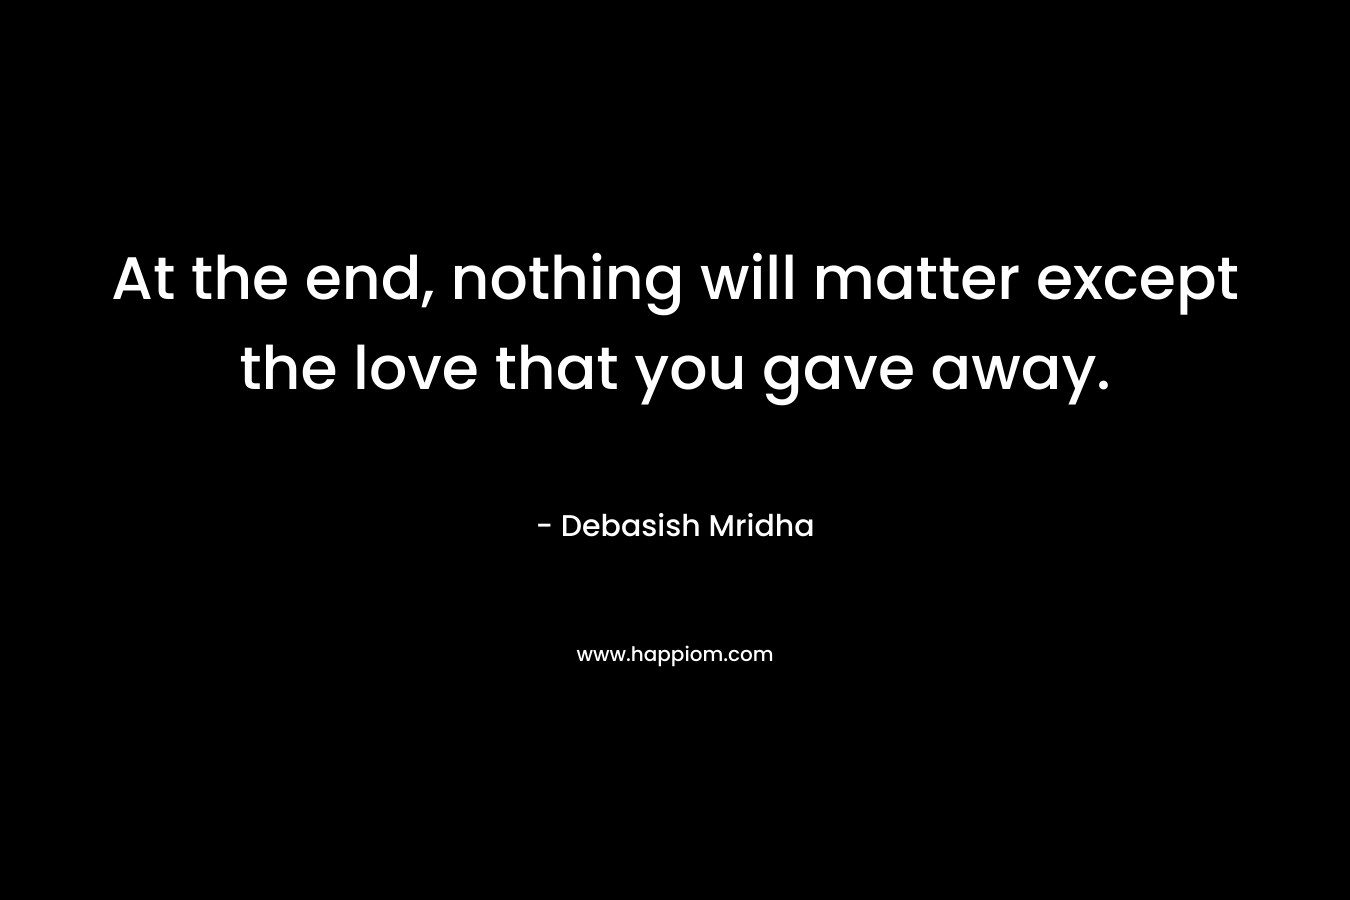 At the end, nothing will matter except the love that you gave away.